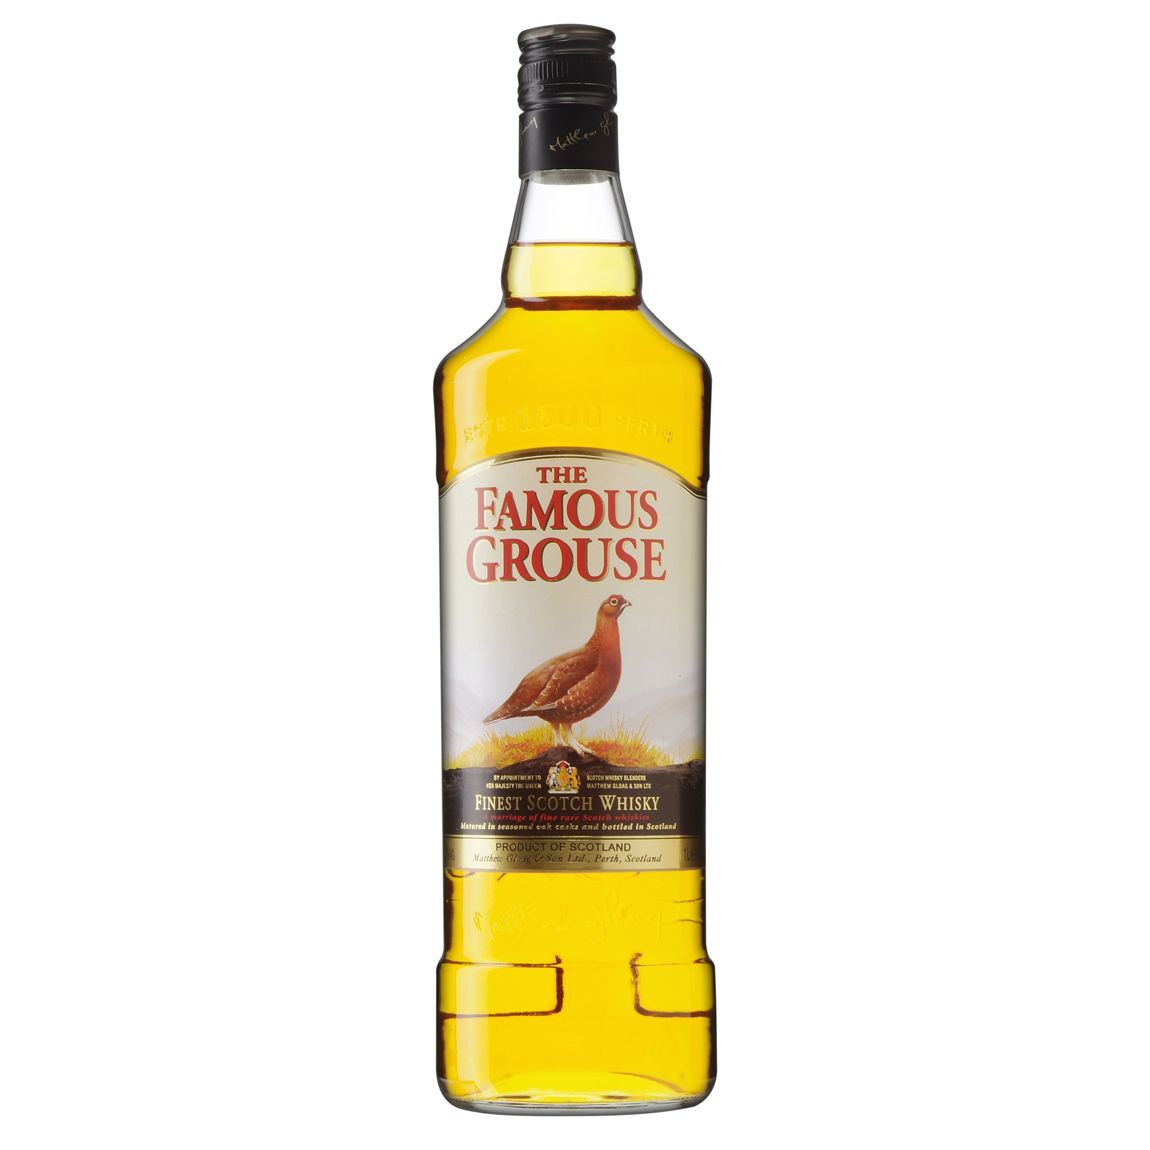 The Famous Grouse Whisky, 1 Litre at John Lewis